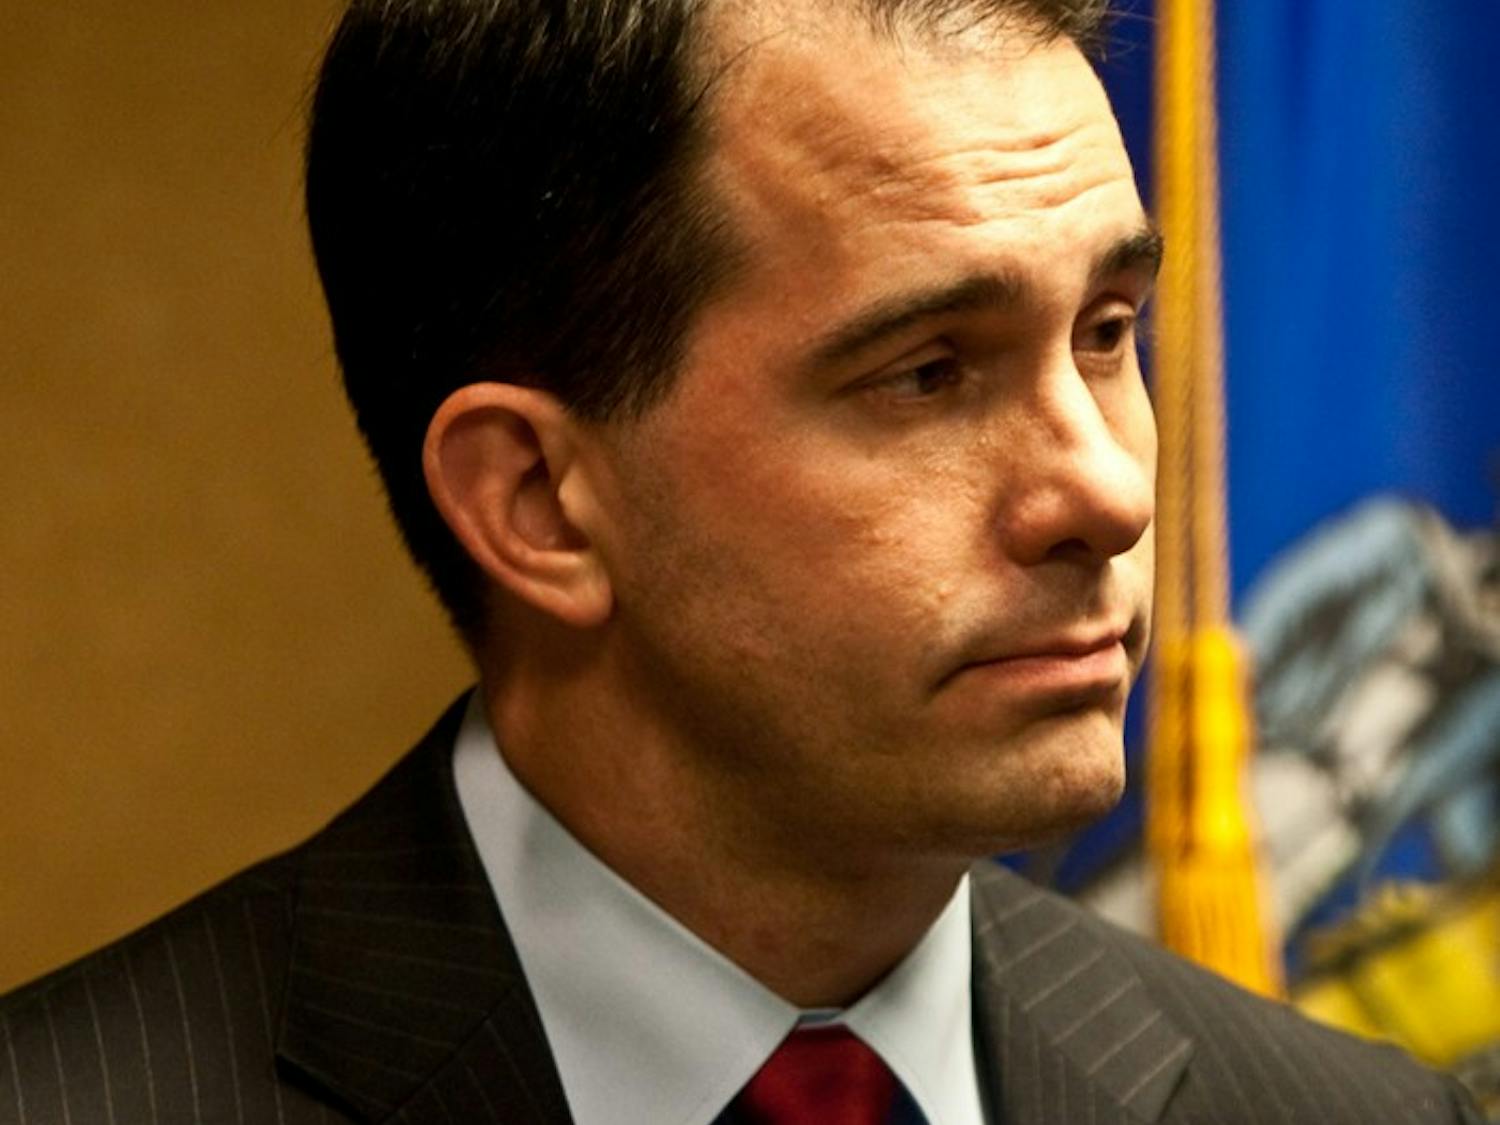 Walker wins the governorship